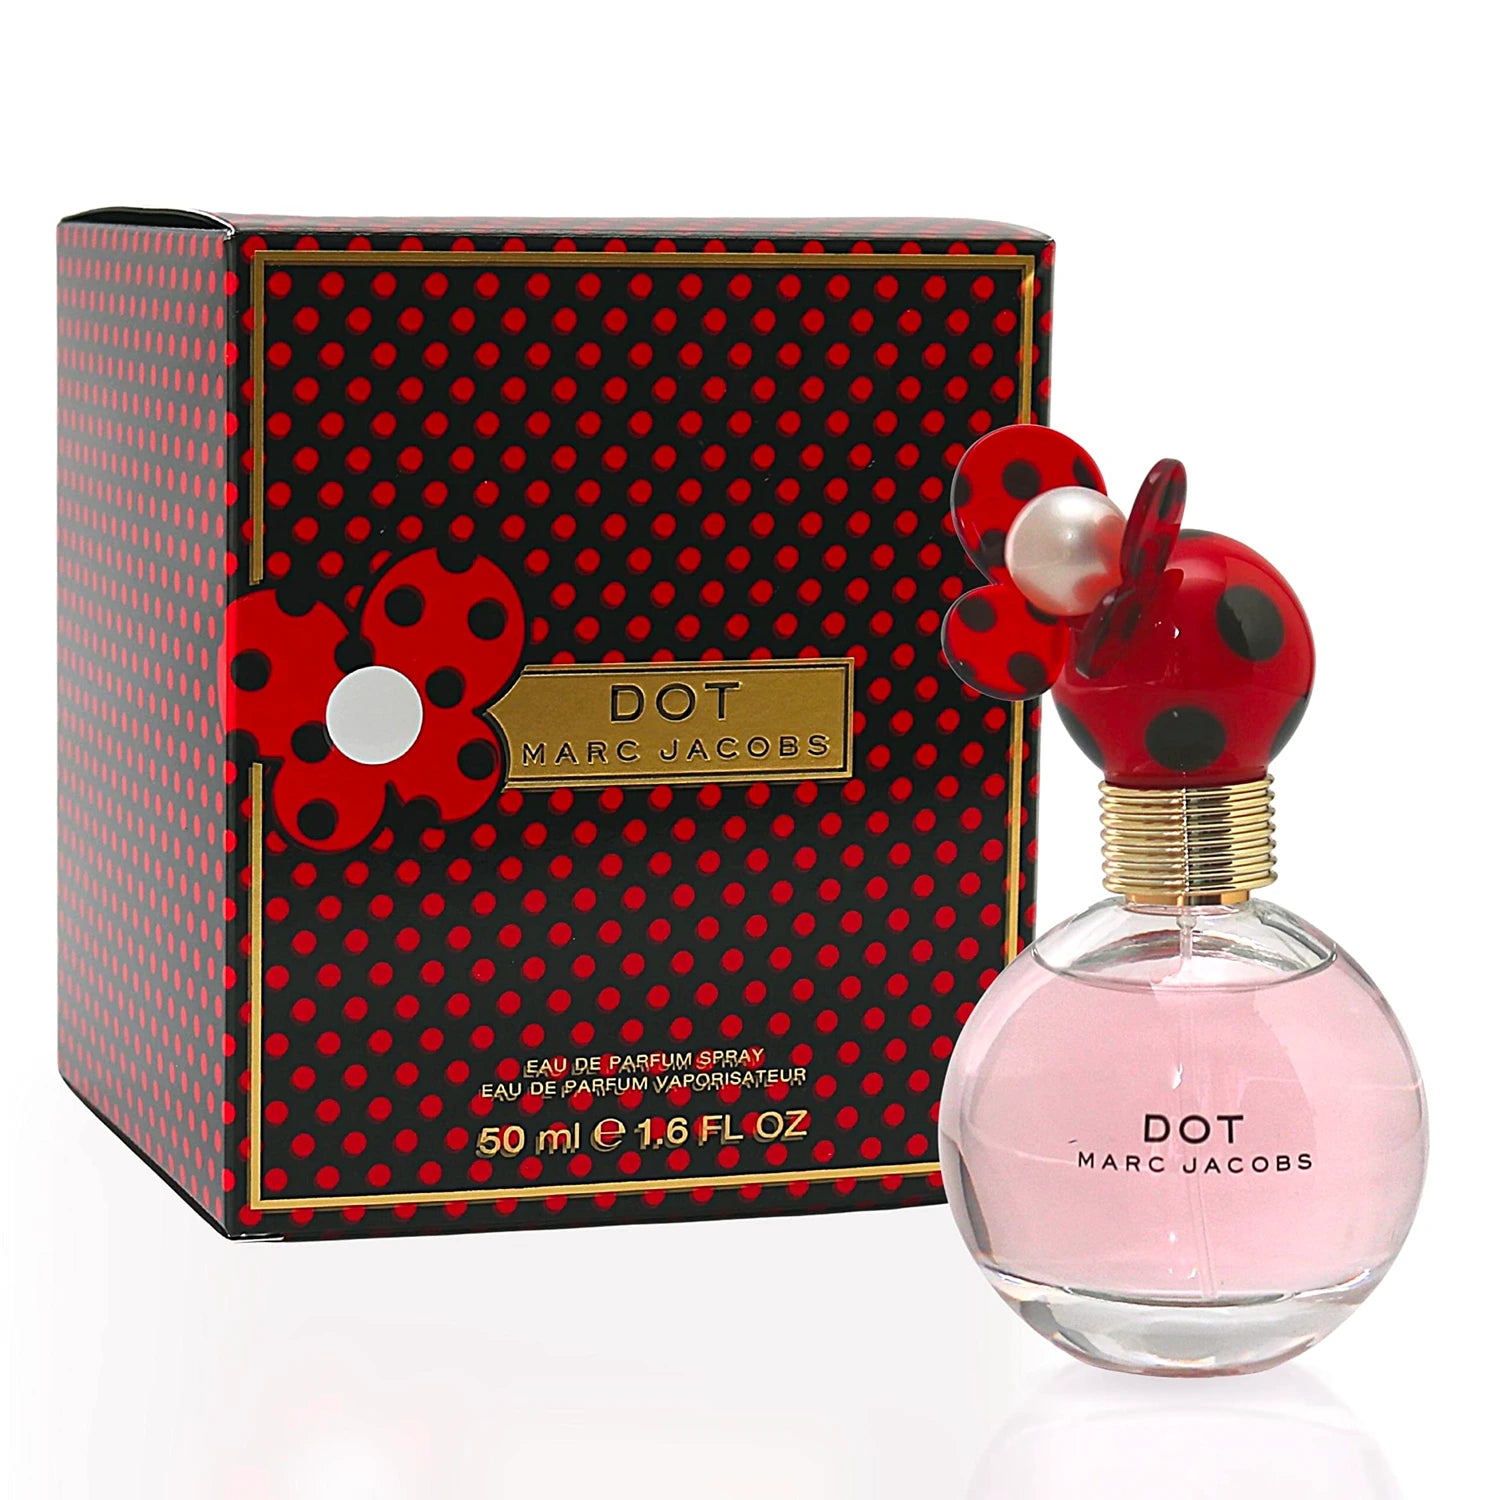 <p><meta charset="utf-8"><span>Marc Jacobs Dot is a Floral Fruity scent for women, released in 2012. Created by Annie Buzantian and Ann Gottlieb, top notes of this scent include Red Berries, Pitahaya, and Honeysuckle; middle notes of Coconut, Jasmine, and Orange Blossom; and a base of Driftwood, Musk, and Vanilla. This modern and characteristic fragrance continues Jacobs’ playful collection with a cheerful blend of petals.</span></p>